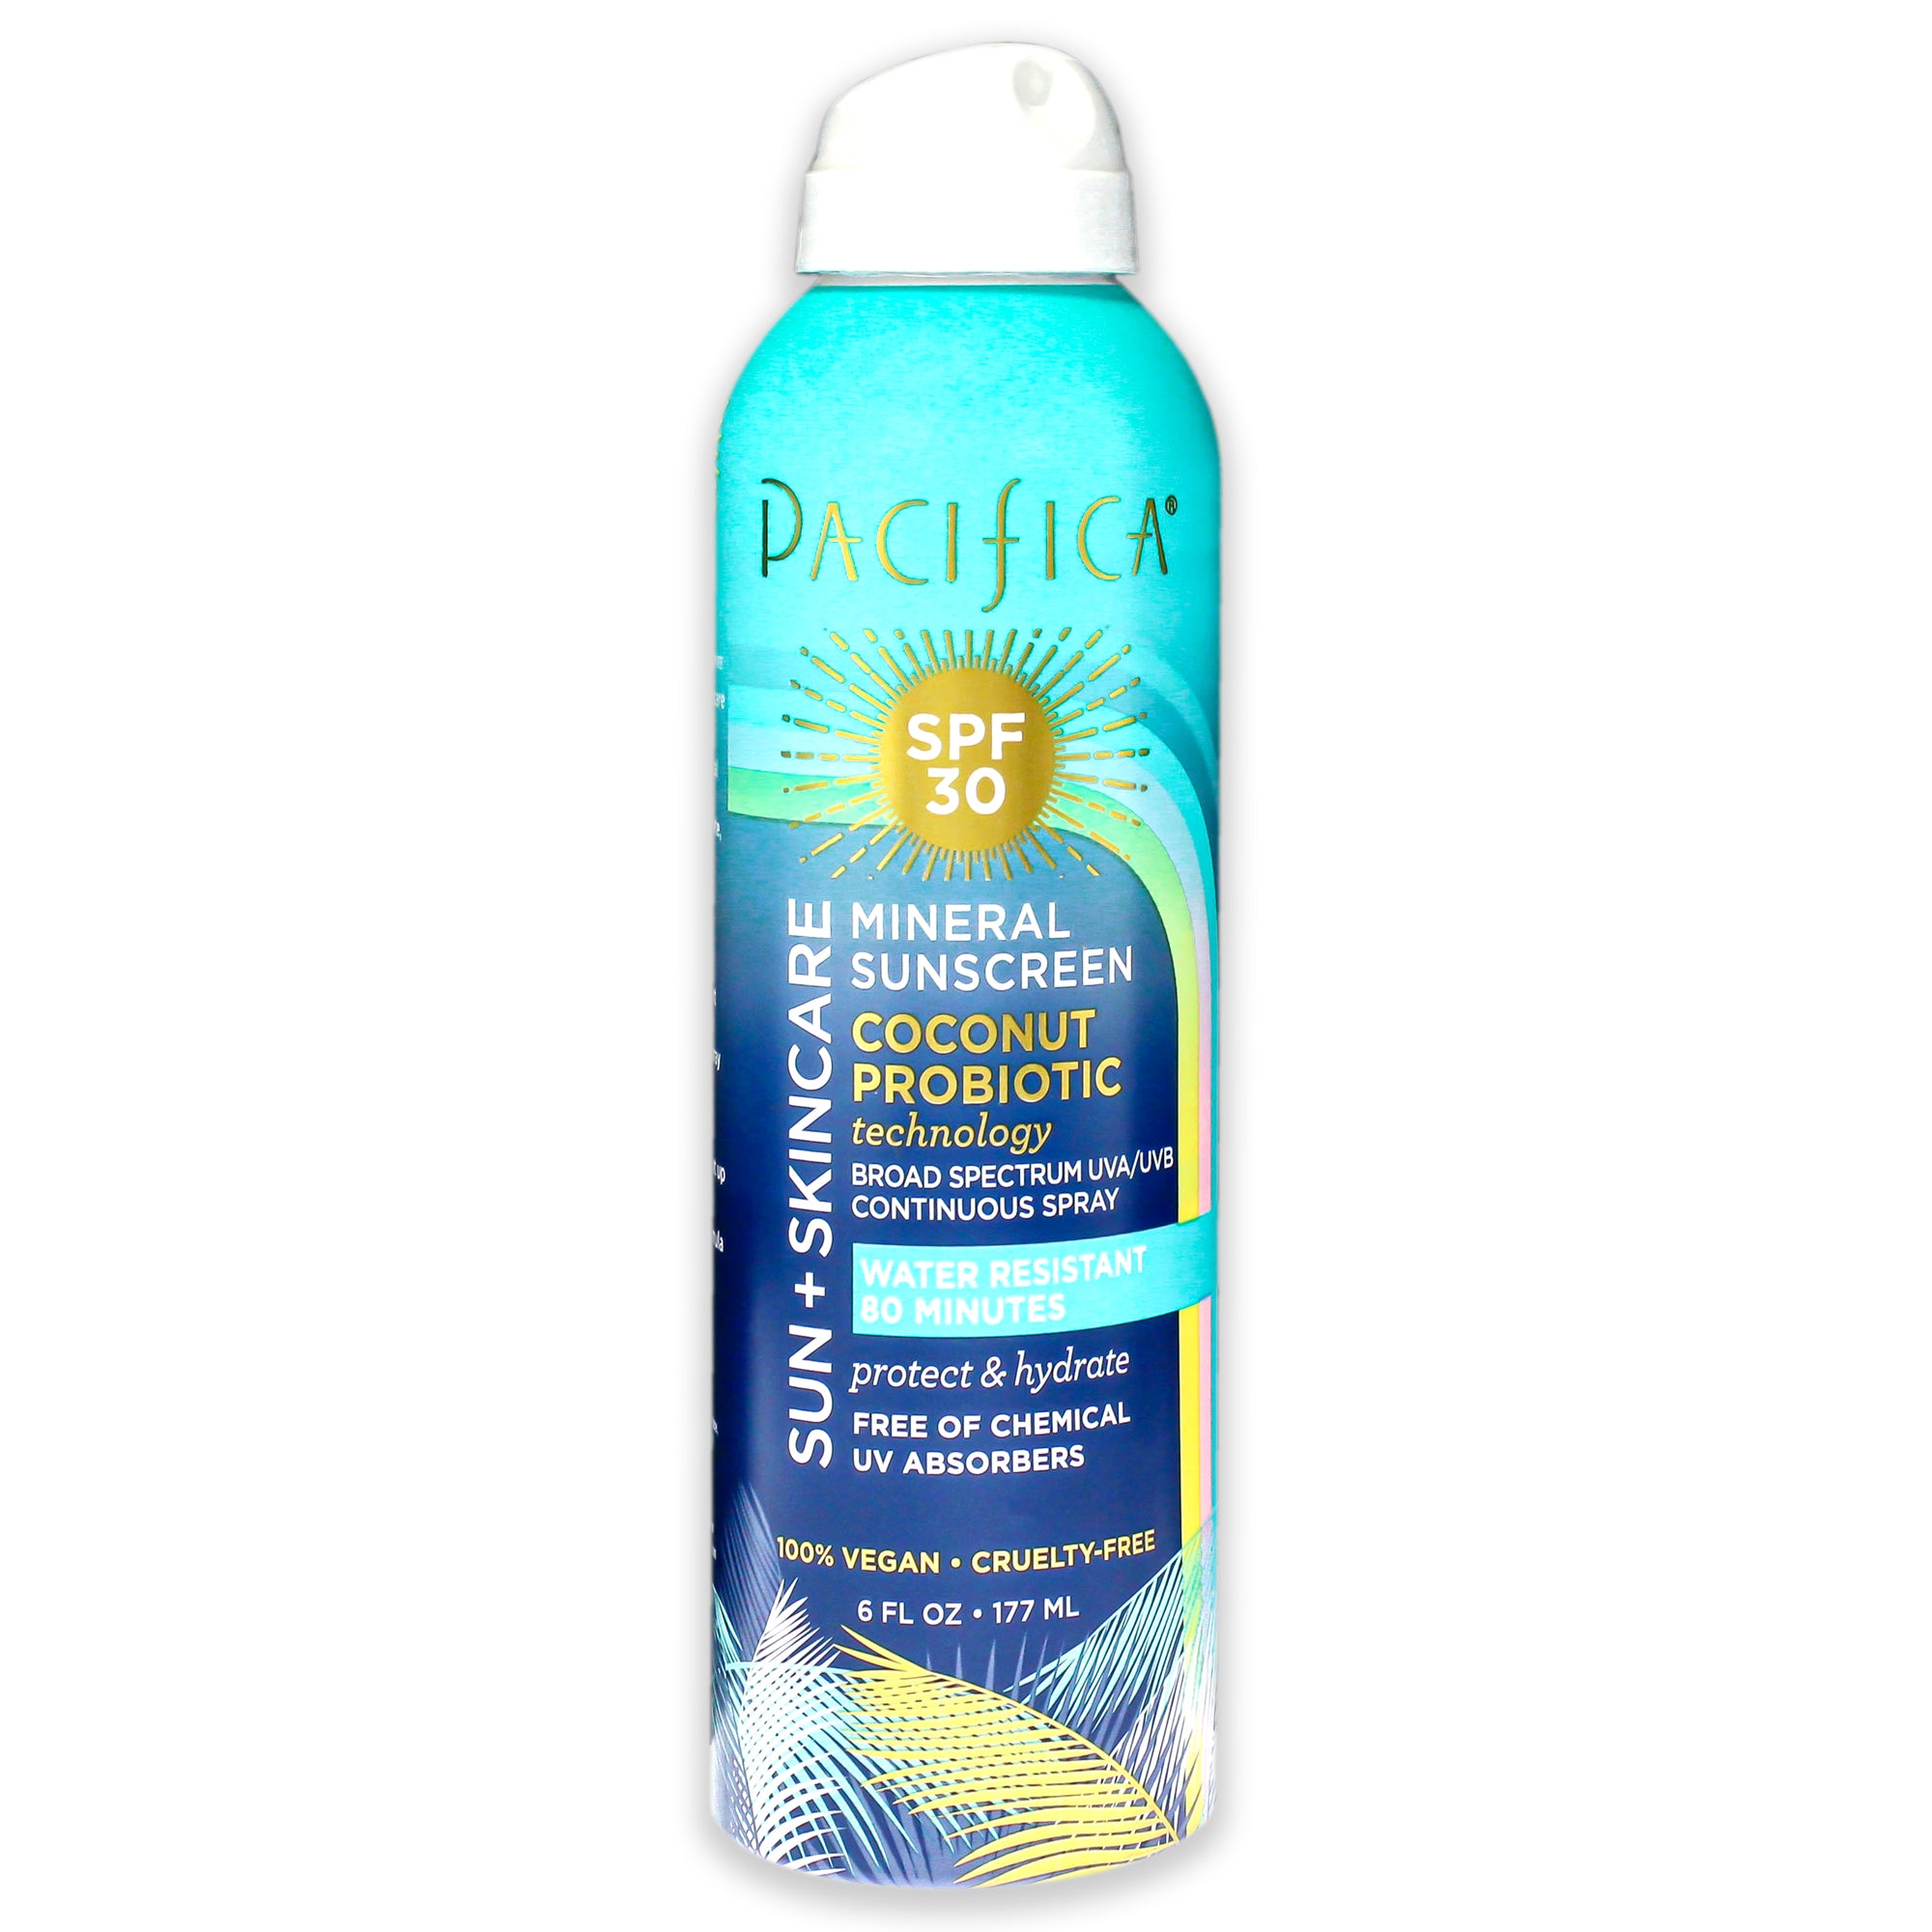 Mineral Sunscreen Spray SPF 30 - Coconut Probiotic by Pacifica for Women - 6 oz Sunscreen